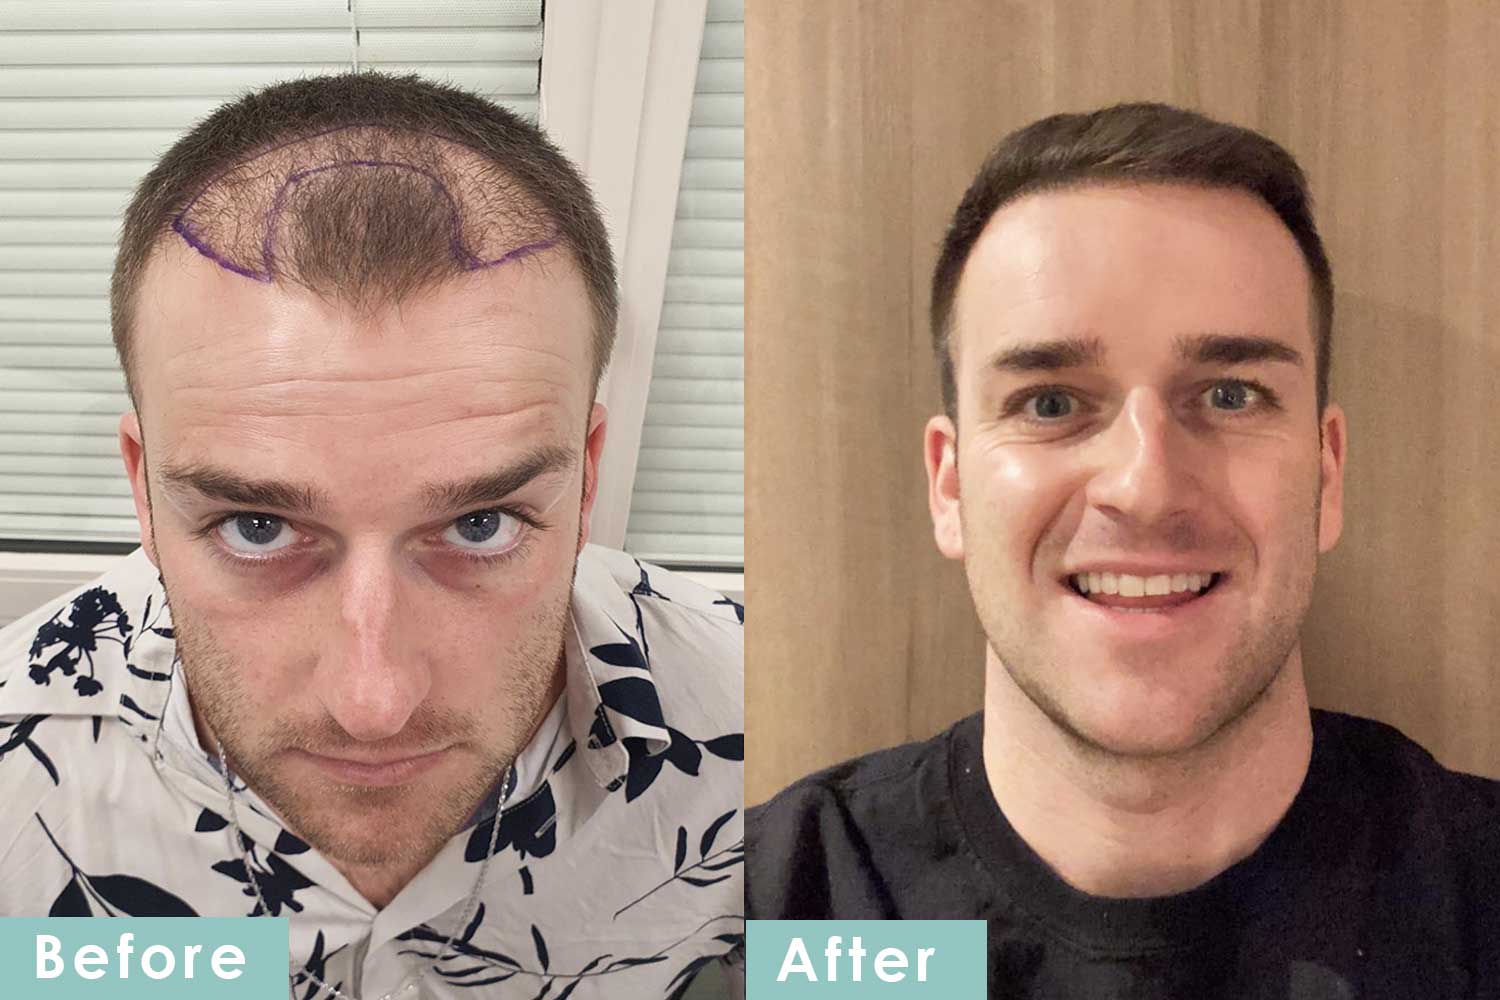 Hair Transplant Before and After Images | Hair Transplantation Images